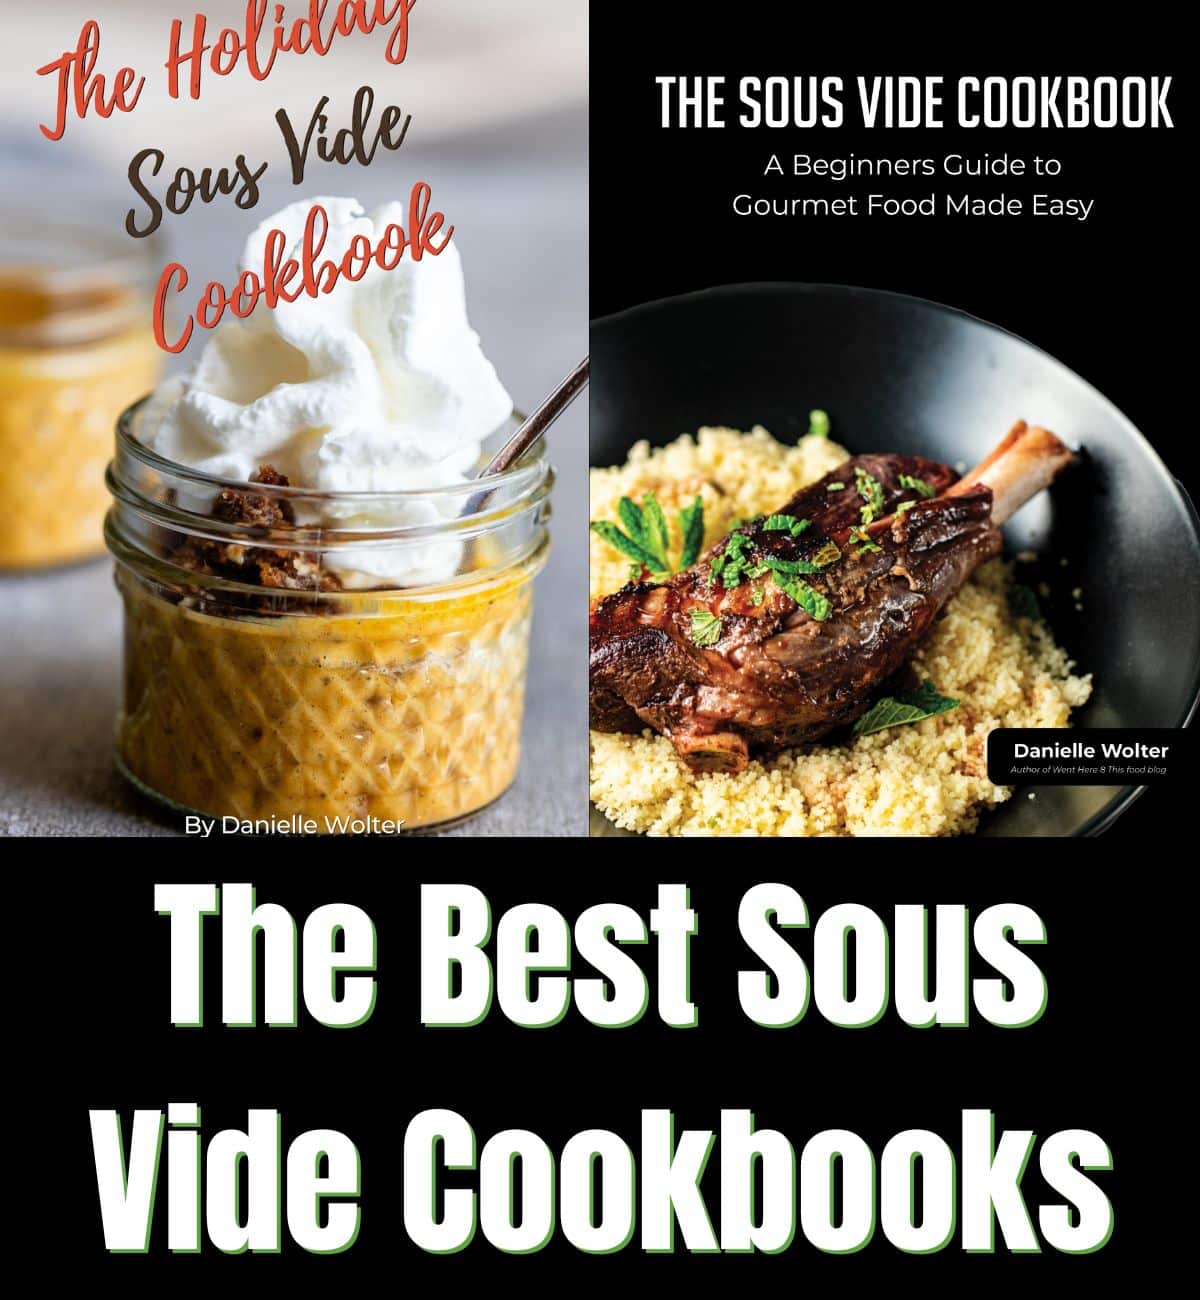 Sous-vide cooking made easy - look up cooking times!